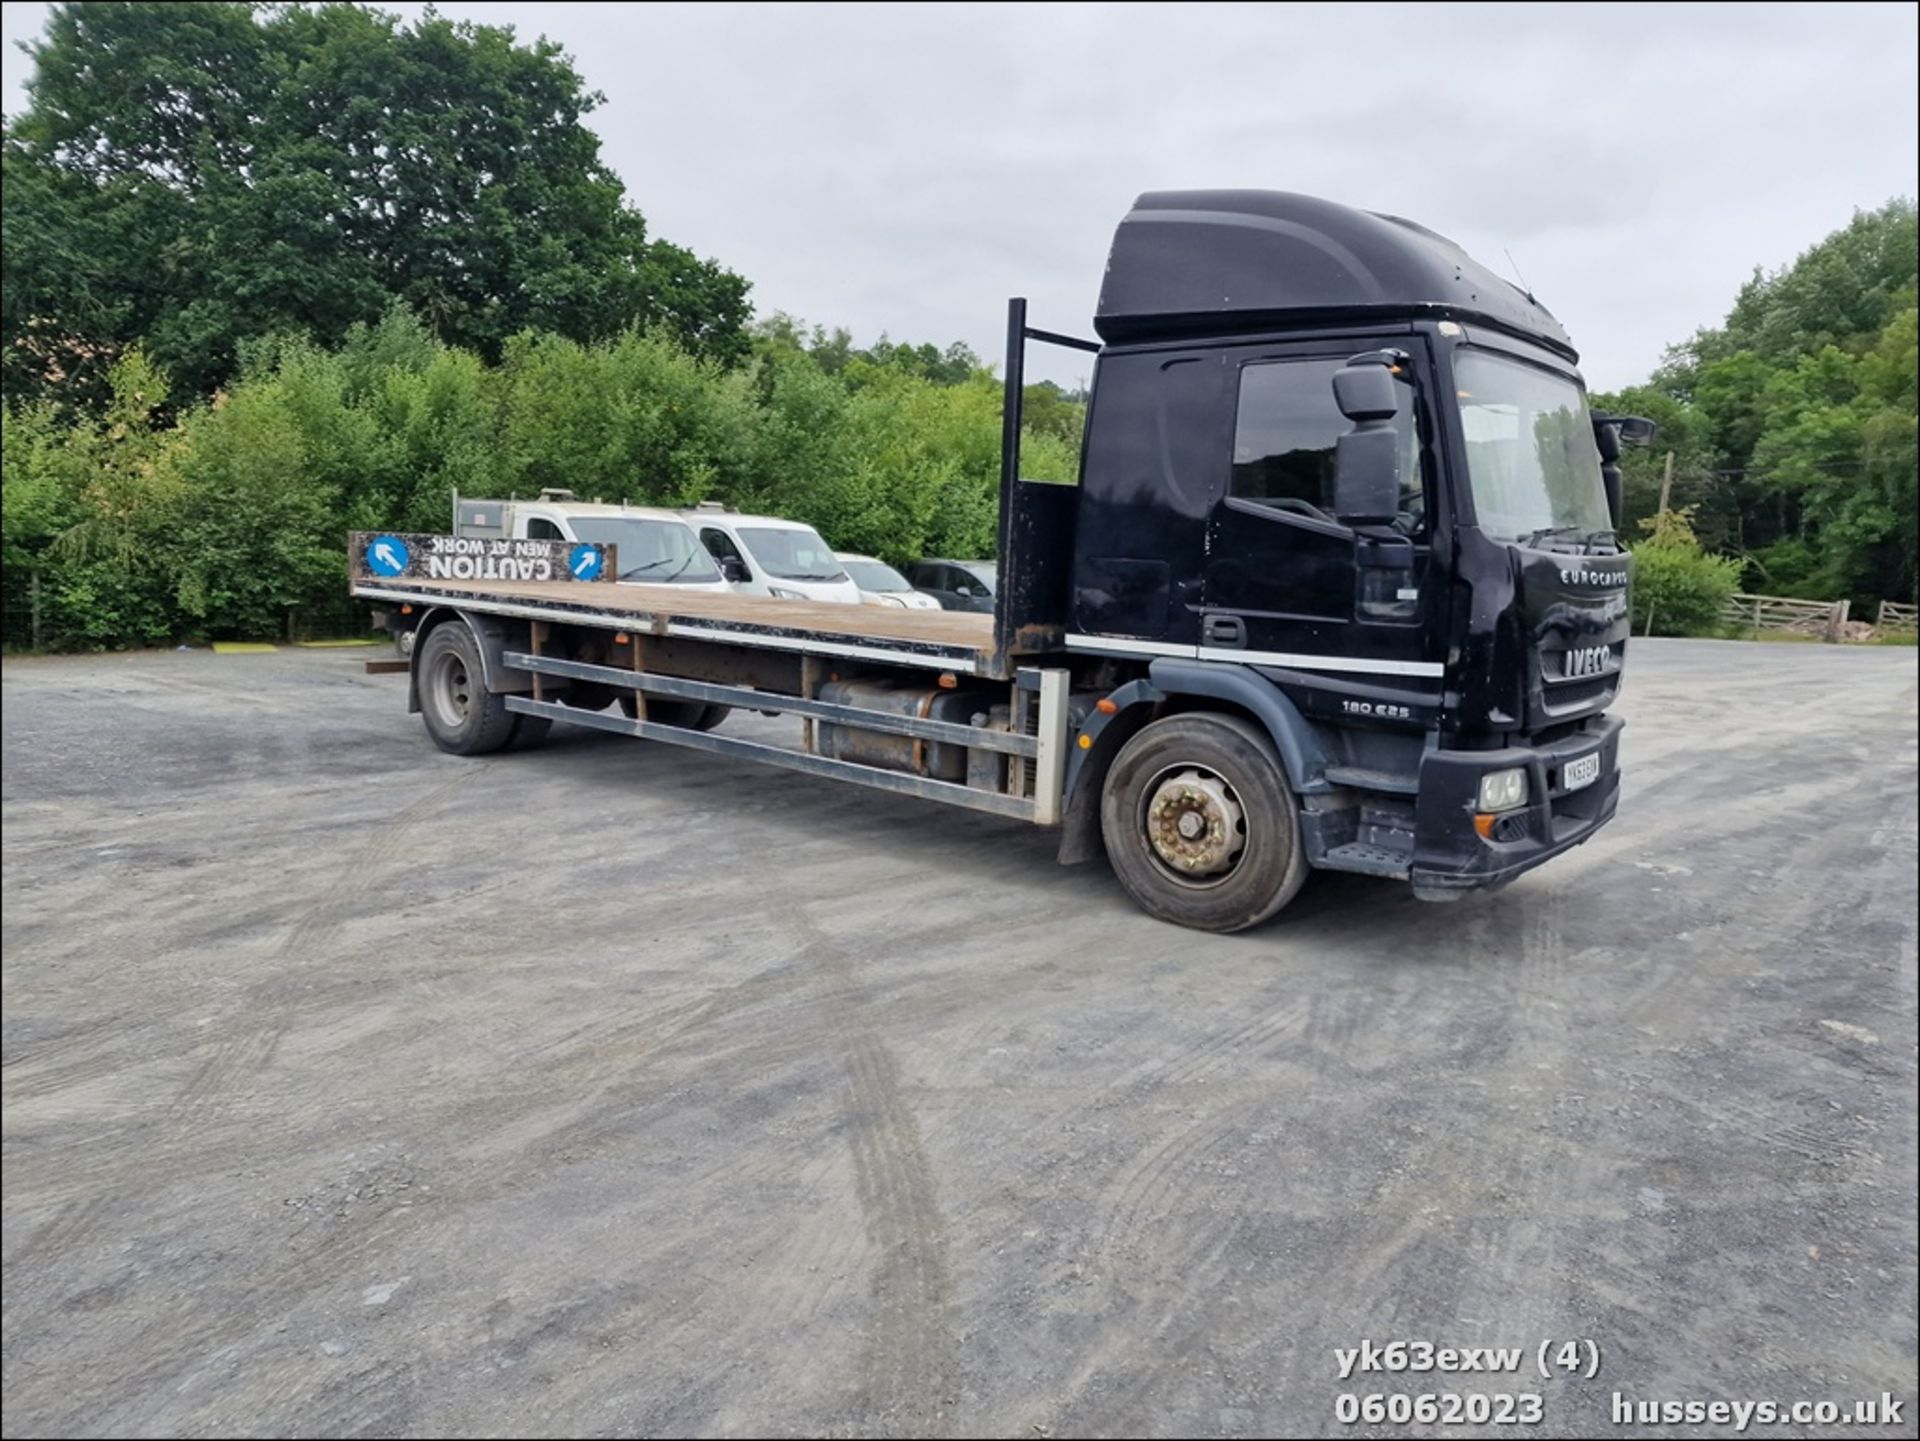 13/63 IVECO EUROCARGO (MY 2008) - 5880cc 2dr Flat Bed (Black) - Image 4 of 21